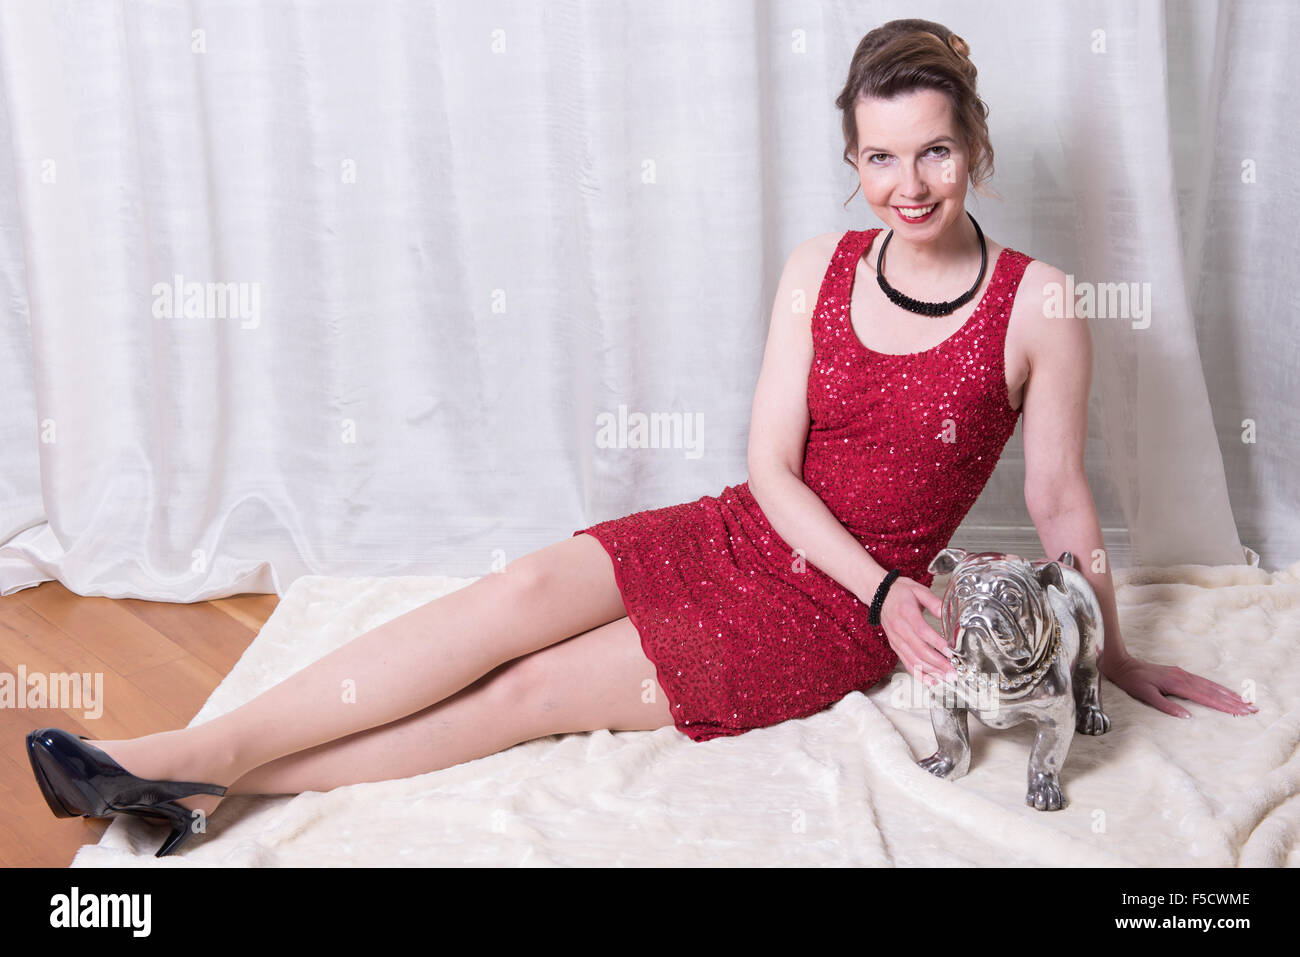 woman in red dress with dog on blanket Stock Photo